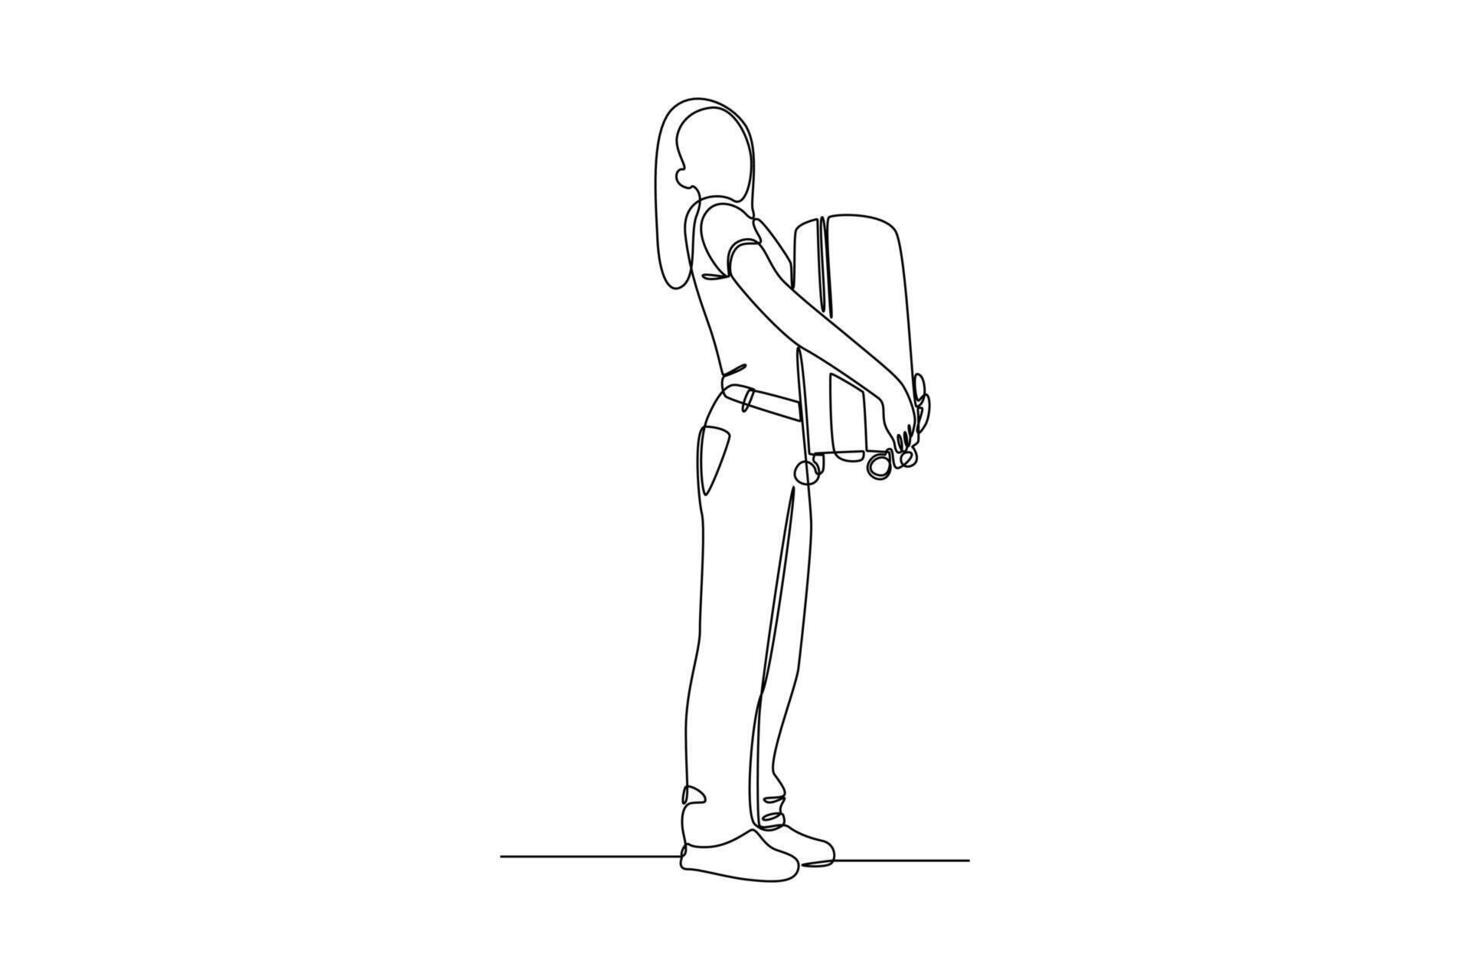 Continuous one line drawing Traveling with bag or suitcase concept. Doodle vector illustration.